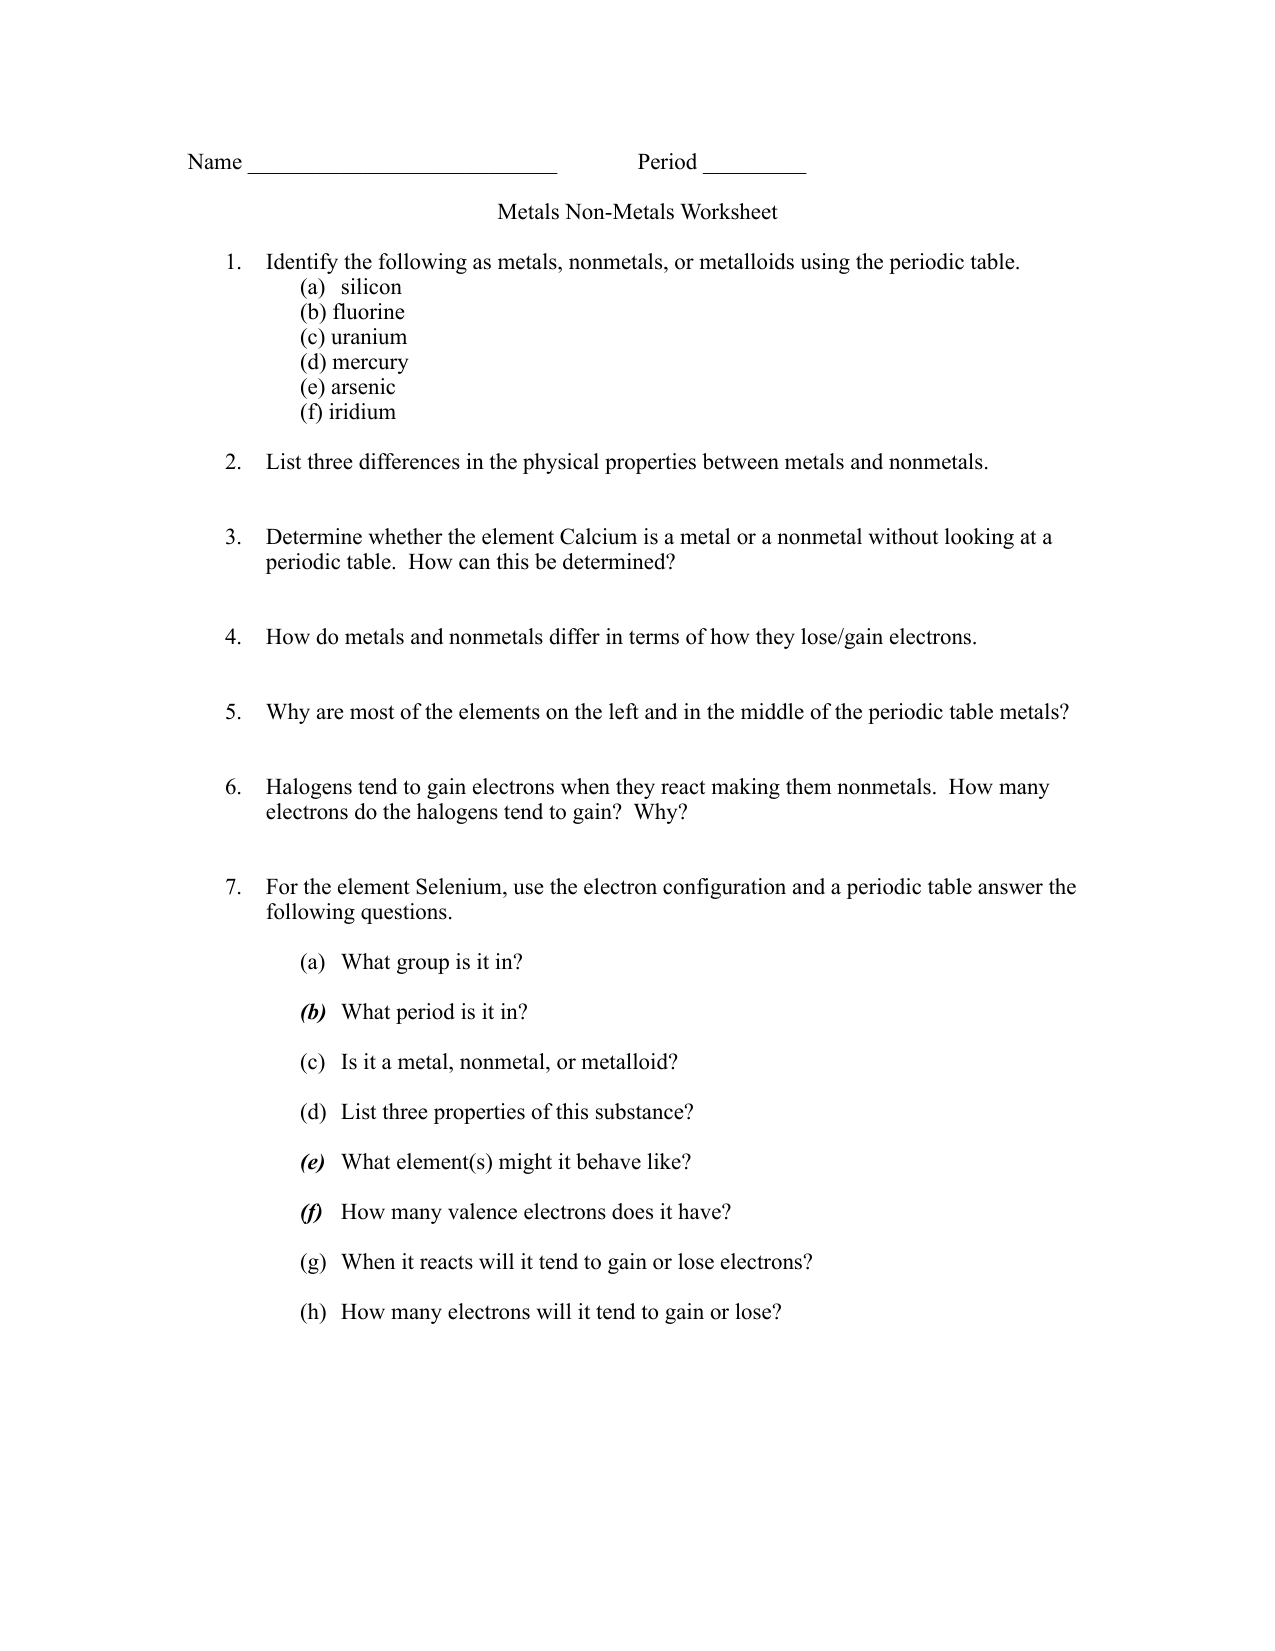 Metals-and-Nonmetals-worksheet-21j21oon With Metals Nonmetals And Metalloids Worksheet